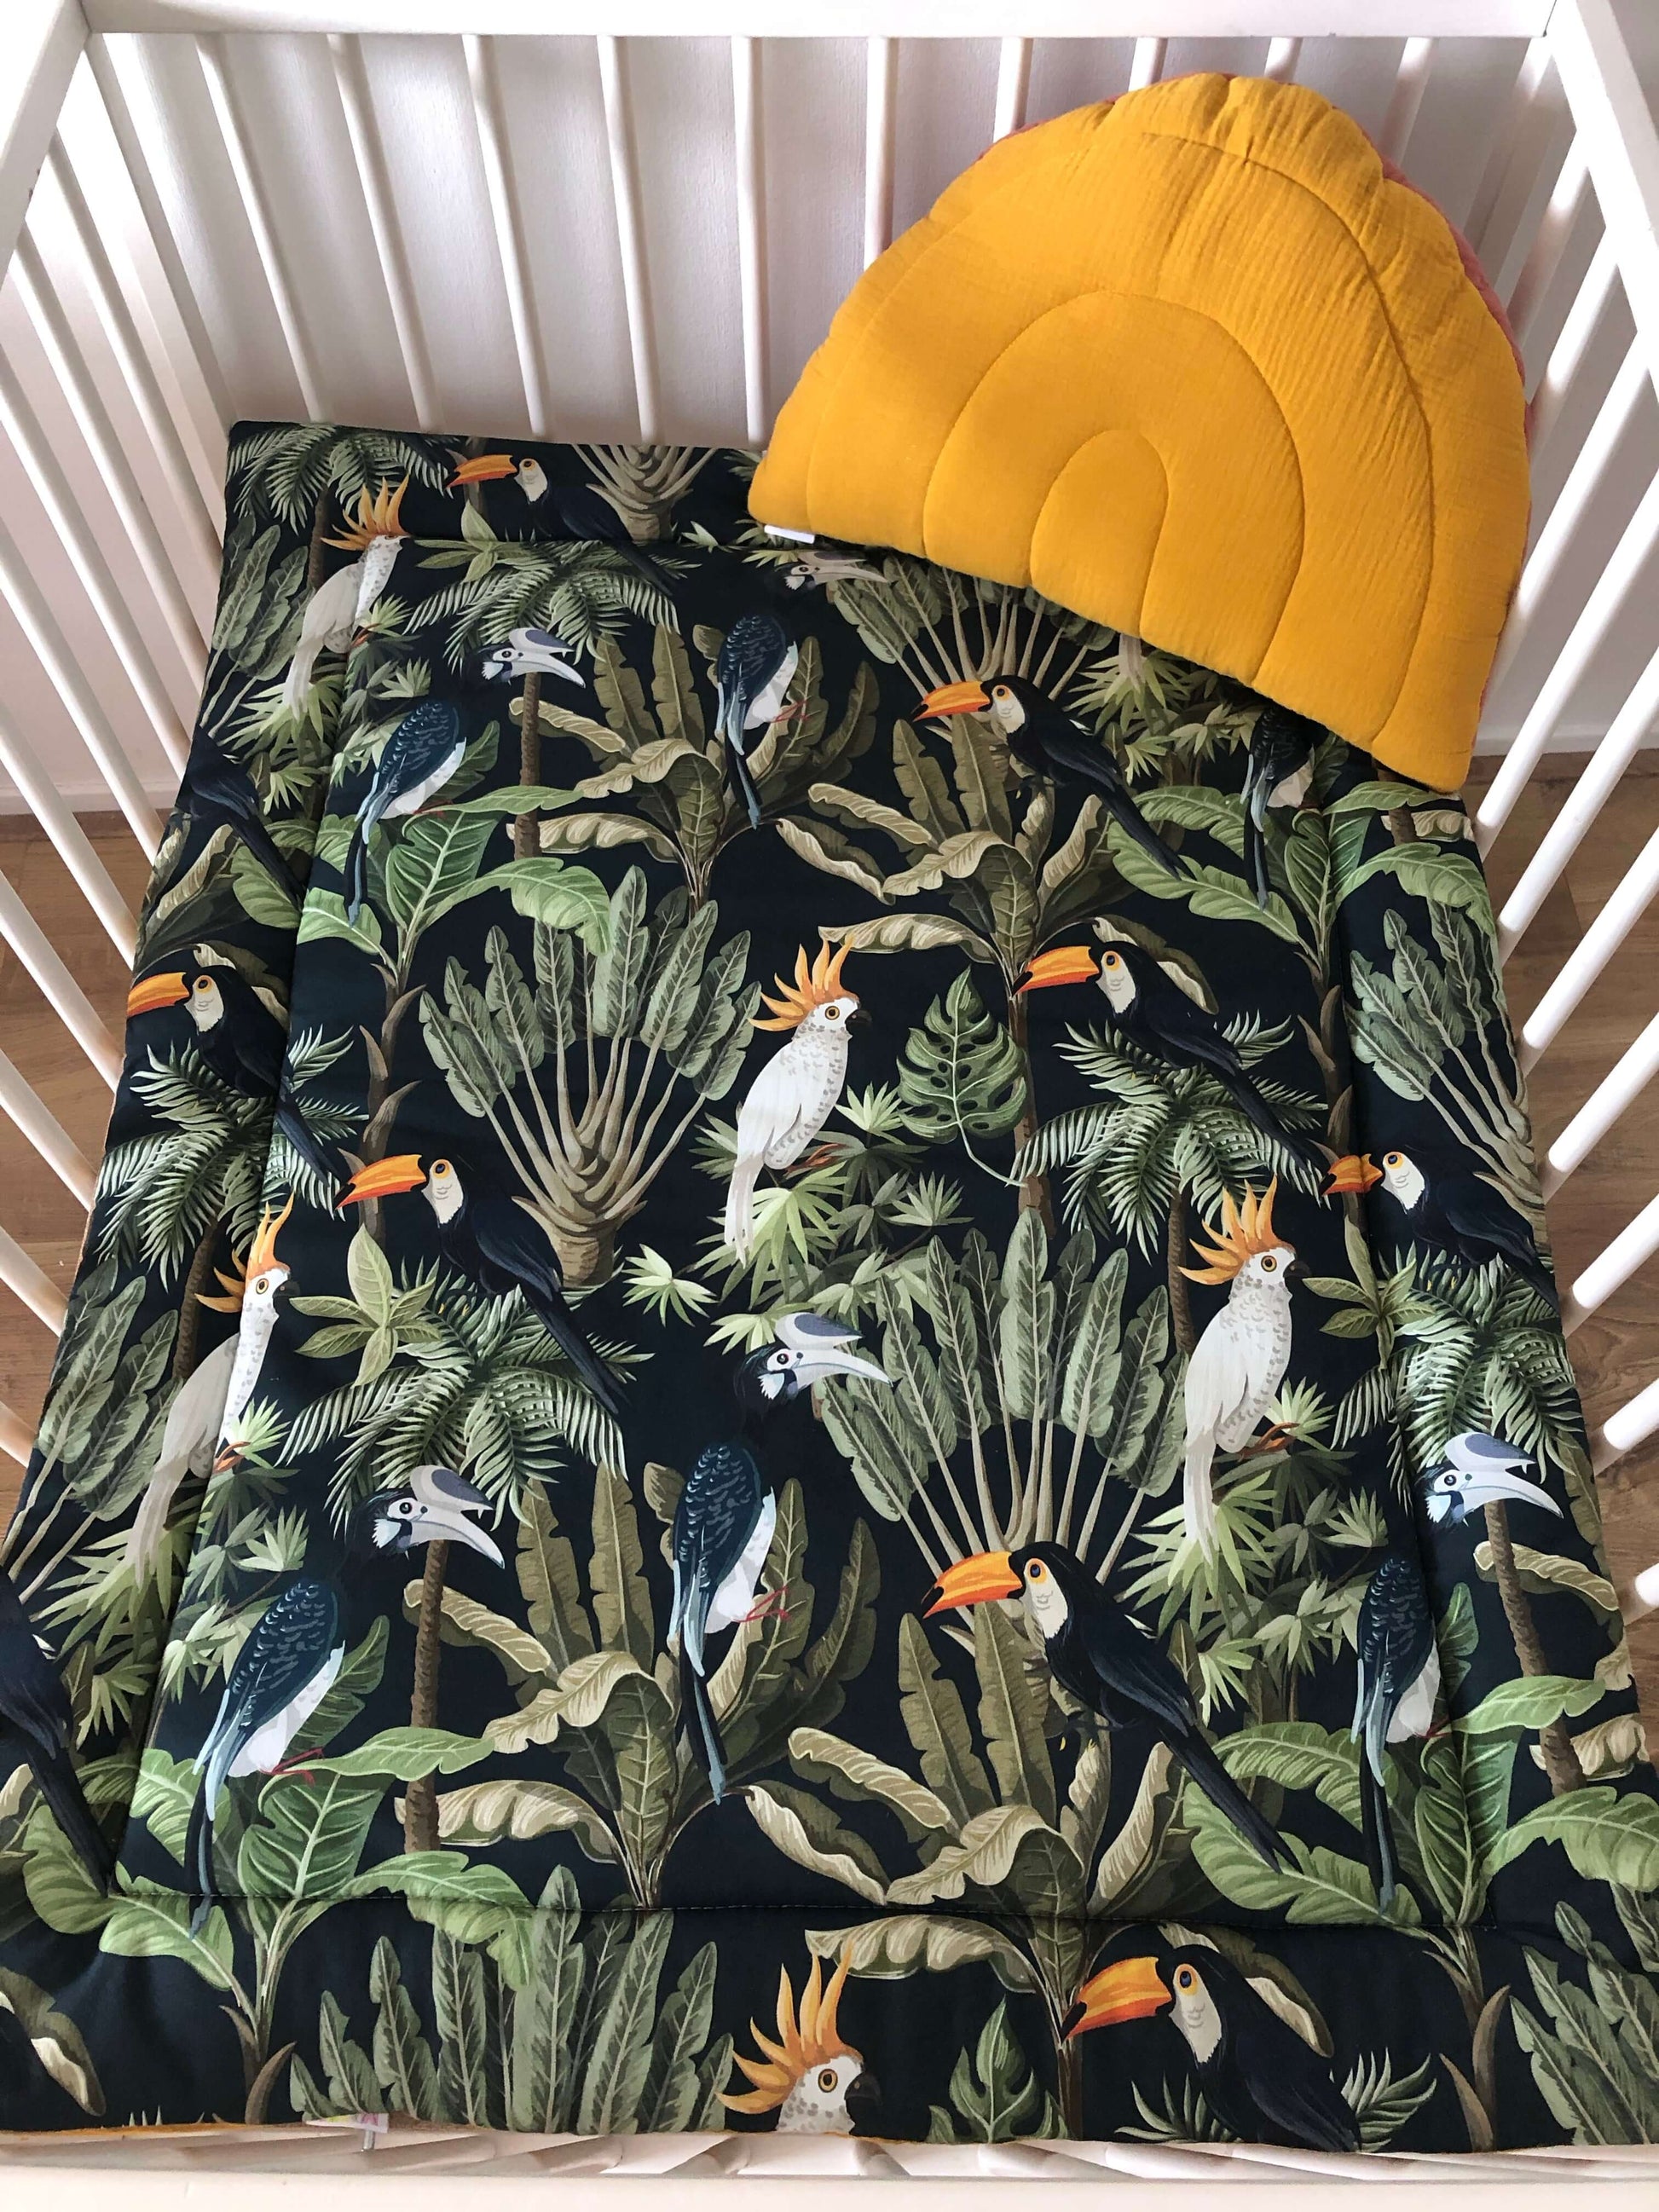 Matuu - THE TROPICAL FOREST & mustard - box rug (boxkleed), quilt baby blanket,play mat